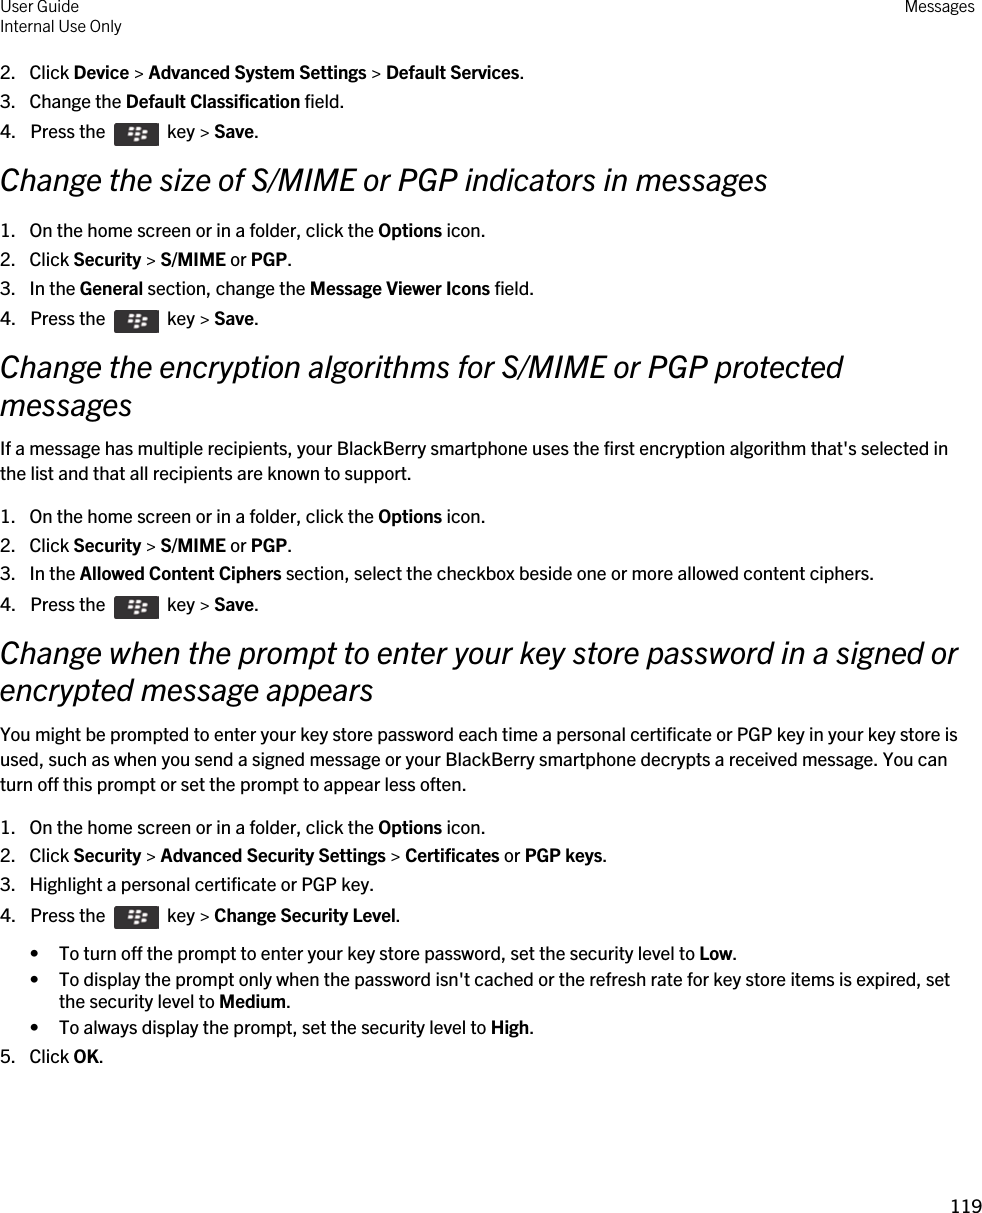 2. Click Device &gt; Advanced System Settings &gt; Default Services.3. Change the Default Classification field.4.  Press the    key &gt; Save. Change the size of S/MIME or PGP indicators in messages1. On the home screen or in a folder, click the Options icon.2. Click Security &gt; S/MIME or PGP.3. In the General section, change the Message Viewer Icons field.4.  Press the    key &gt; Save. Change the encryption algorithms for S/MIME or PGP protected messagesIf a message has multiple recipients, your BlackBerry smartphone uses the first encryption algorithm that&apos;s selected in the list and that all recipients are known to support.1. On the home screen or in a folder, click the Options icon.2. Click Security &gt; S/MIME or PGP.3. In the Allowed Content Ciphers section, select the checkbox beside one or more allowed content ciphers.4.  Press the    key &gt; Save. Change when the prompt to enter your key store password in a signed or encrypted message appearsYou might be prompted to enter your key store password each time a personal certificate or PGP key in your key store is used, such as when you send a signed message or your BlackBerry smartphone decrypts a received message. You can turn off this prompt or set the prompt to appear less often.1. On the home screen or in a folder, click the Options icon.2. Click Security &gt; Advanced Security Settings &gt; Certificates or PGP keys.3. Highlight a personal certificate or PGP key.4.  Press the    key &gt; Change Security Level.• To turn off the prompt to enter your key store password, set the security level to Low.• To display the prompt only when the password isn&apos;t cached or the refresh rate for key store items is expired, set the security level to Medium.• To always display the prompt, set the security level to High.5. Click OK.User GuideInternal Use Only Messages119 